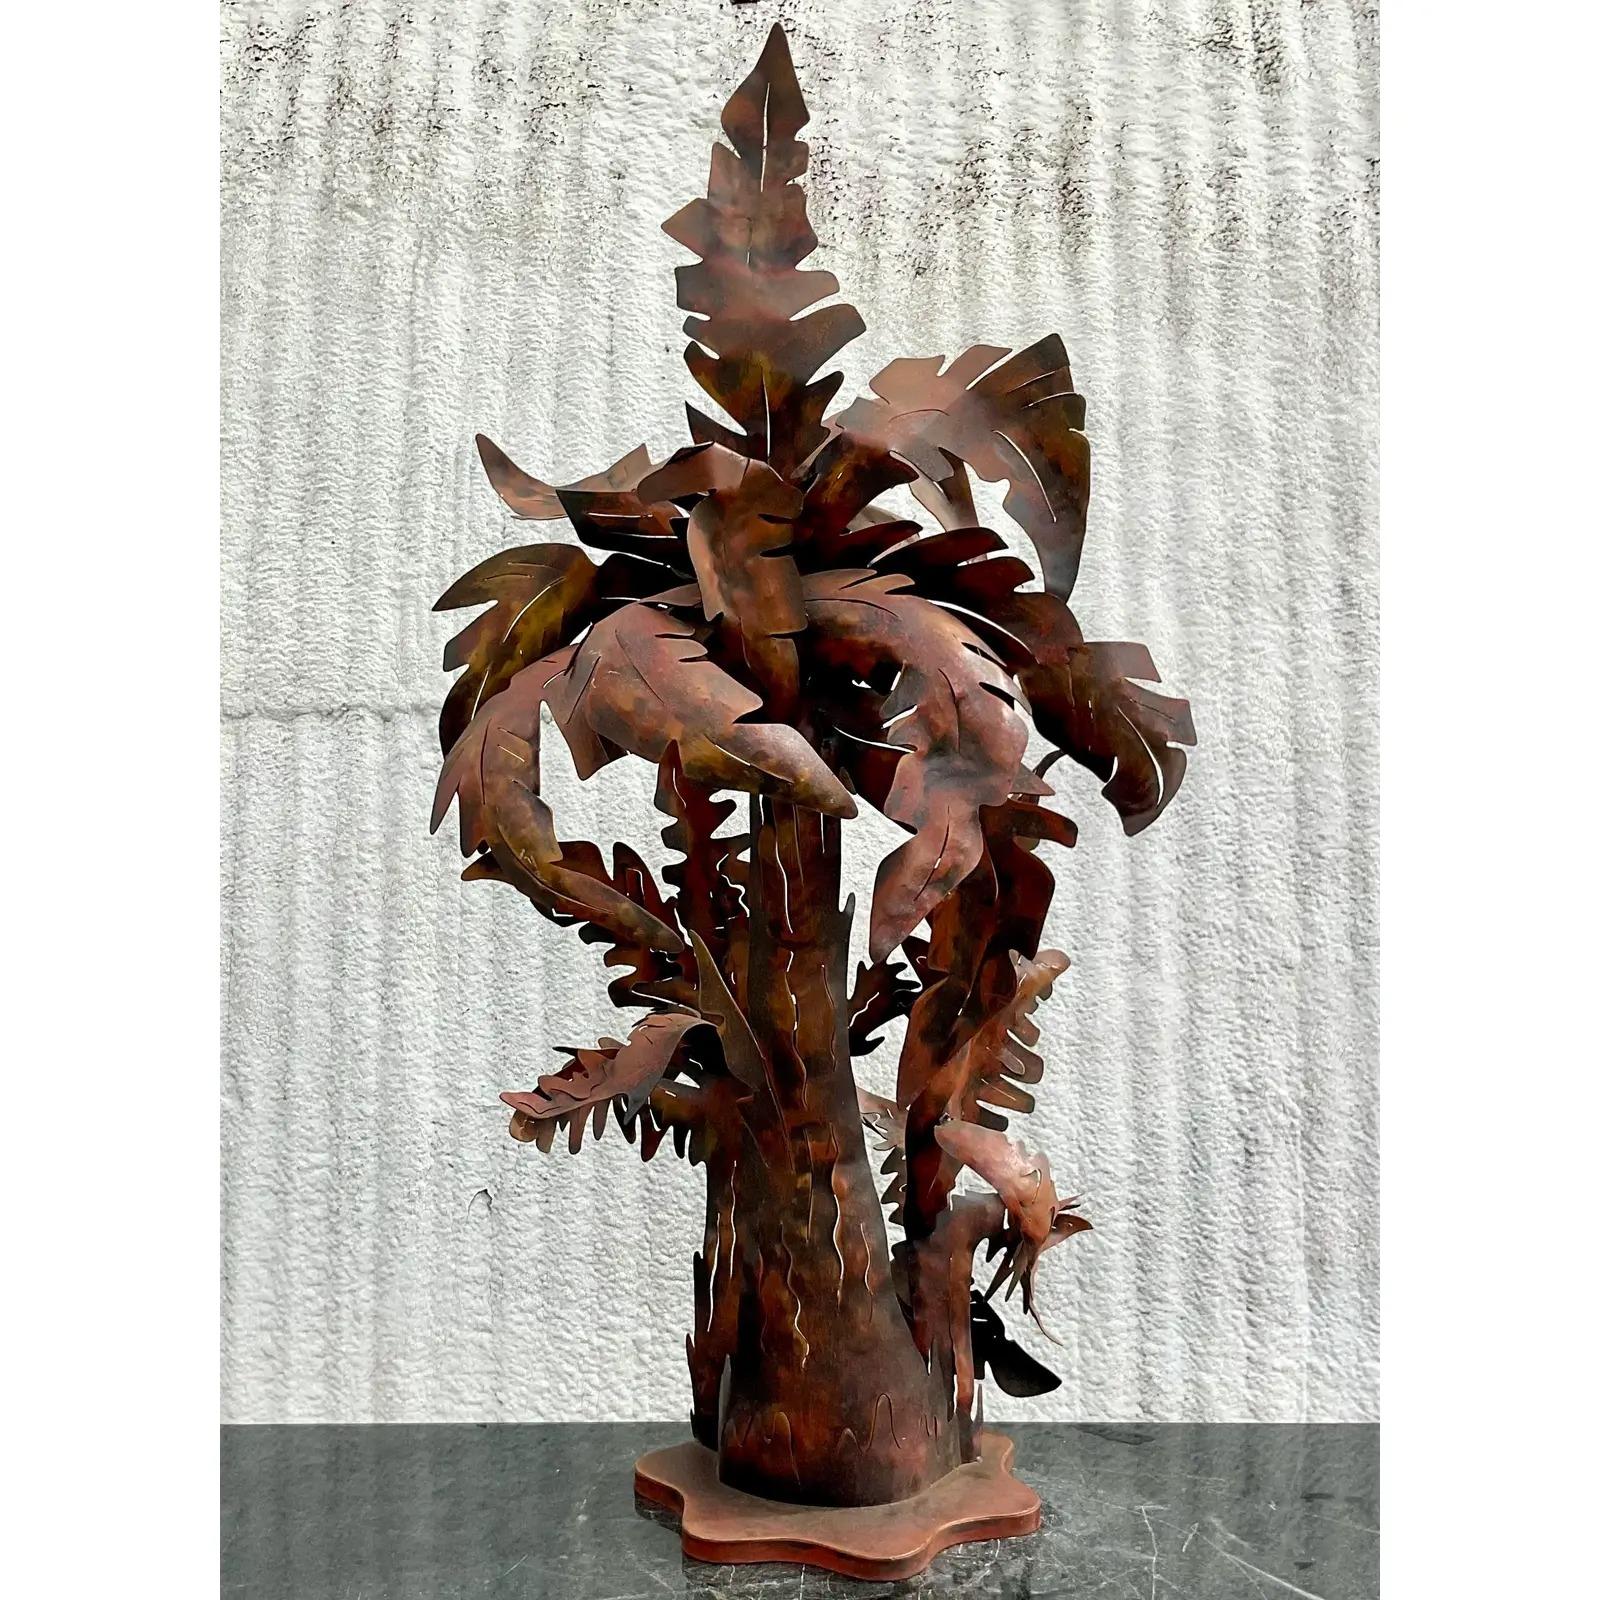 A fantastic vintage Coastal monumental table lamp. A fabulous patinated finish on a punch cut metal palm tree. Large and dramatic and sure to add a little tropical charm to any space. Acquired from a Palm Beach estate.

The palm tree lamp is in